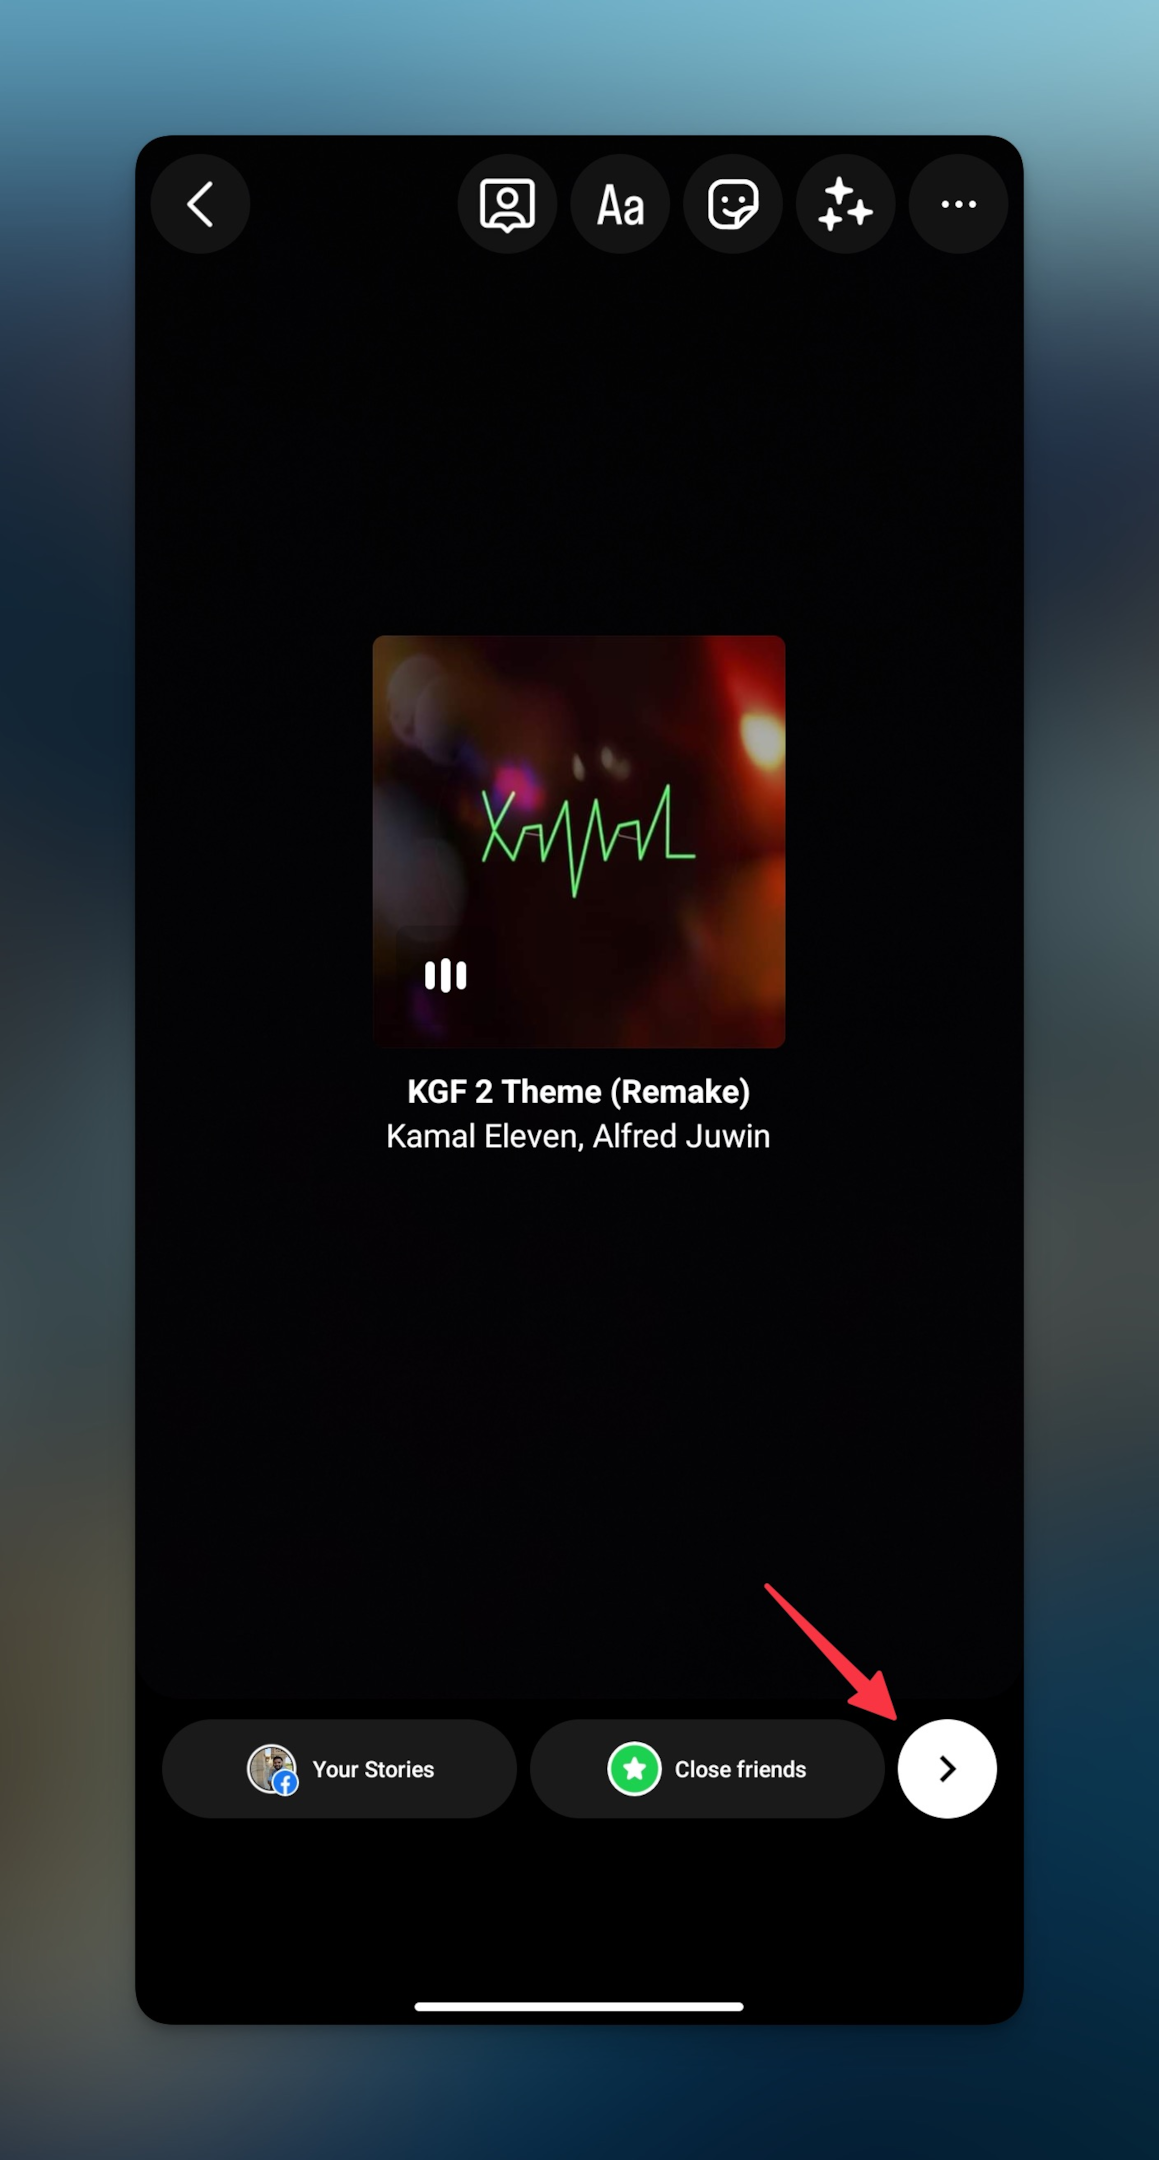 Remote.tools shows to publish stories with music after all customizations are made